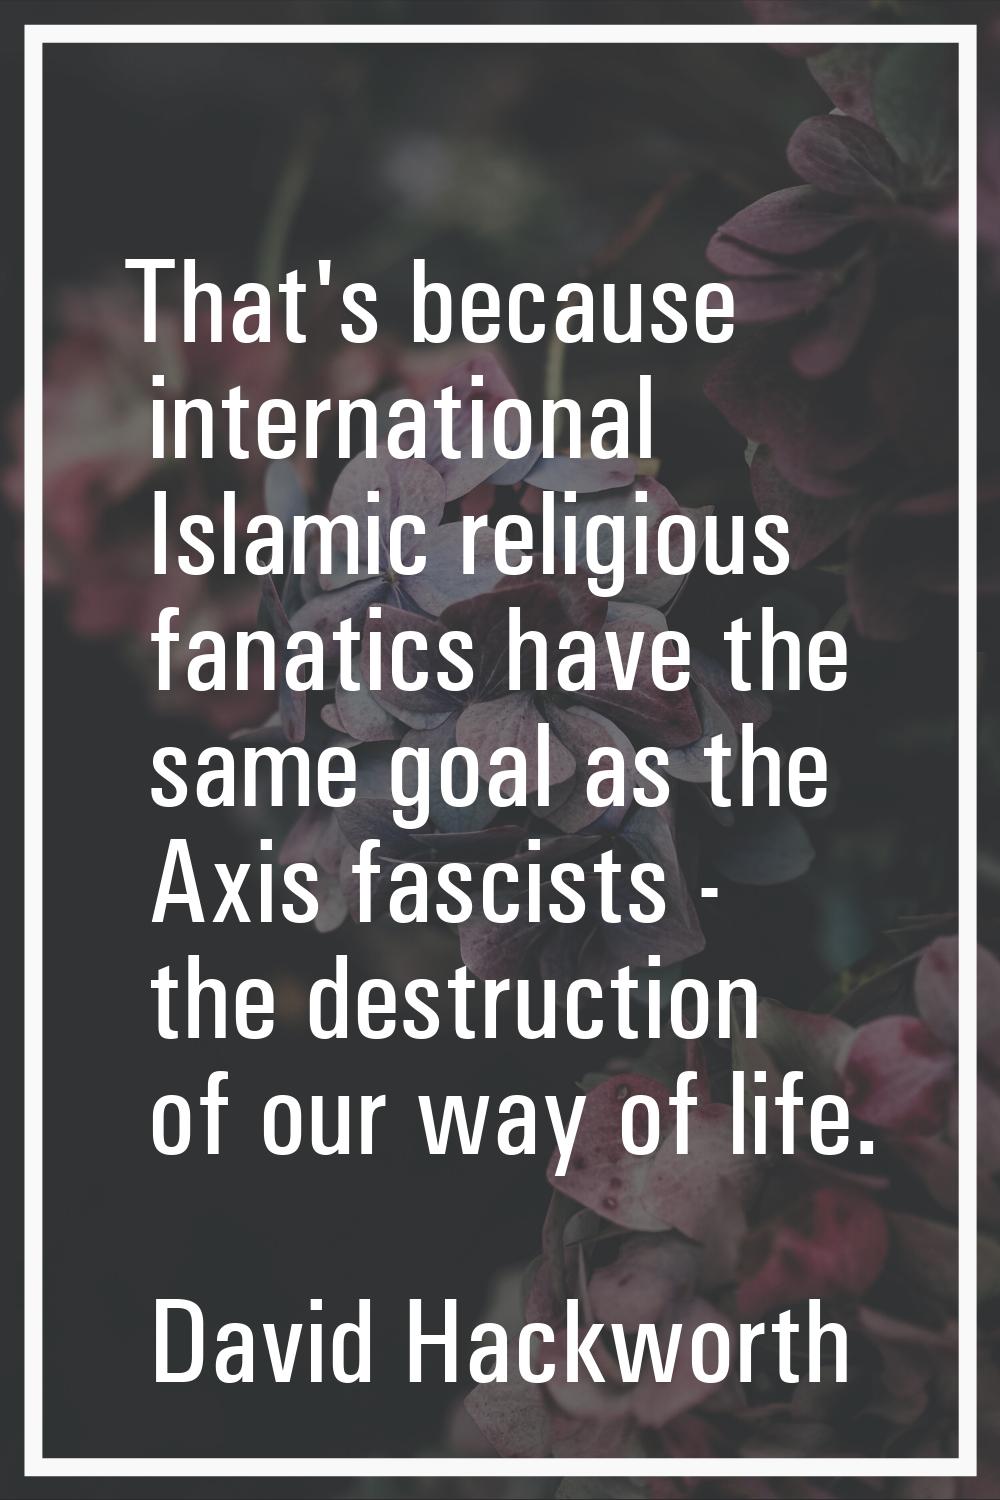 That's because international Islamic religious fanatics have the same goal as the Axis fascists - t